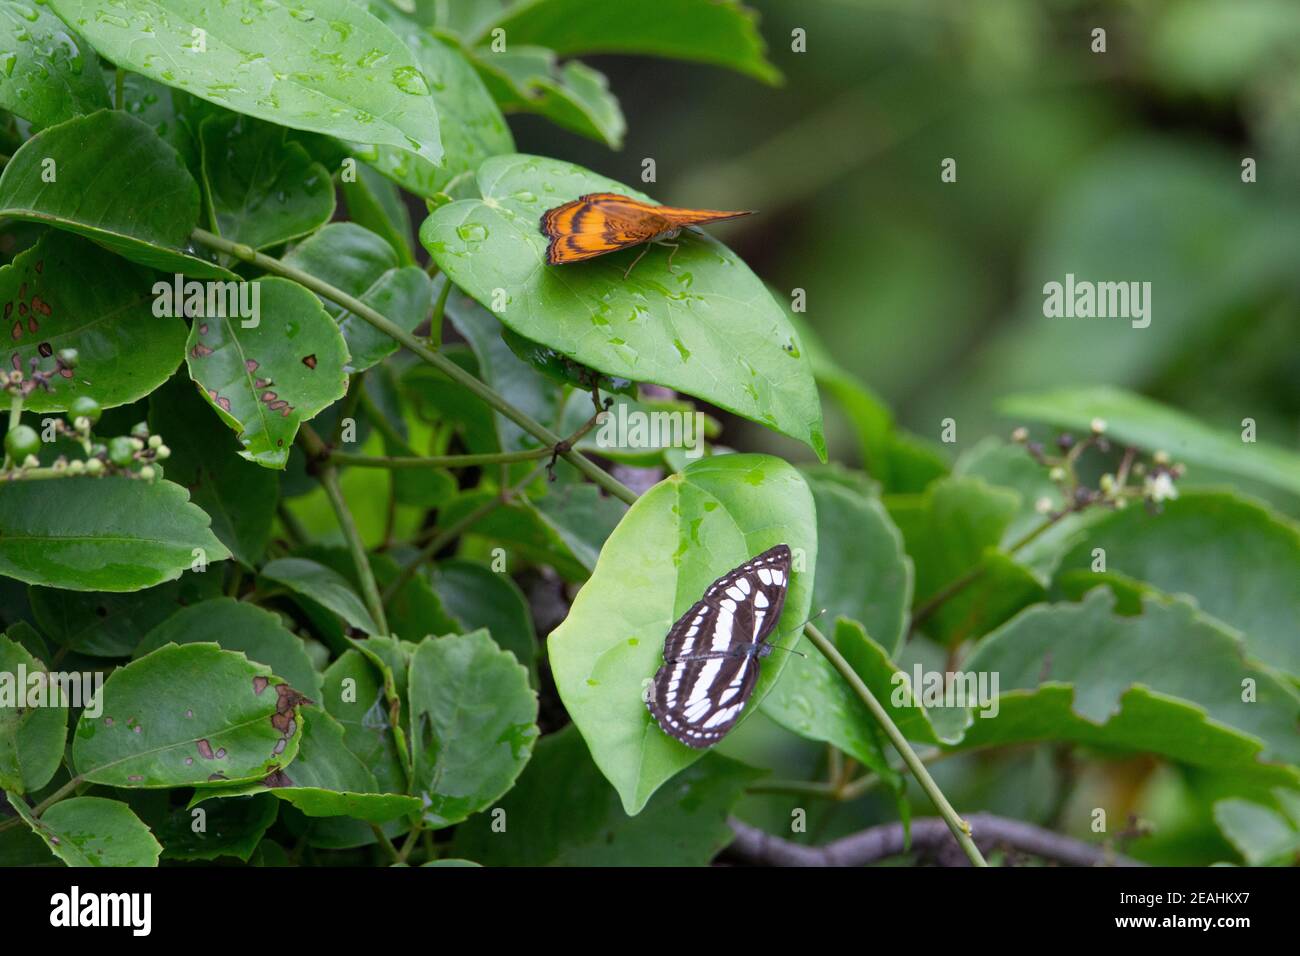 Common Sailor (Neptis hylas papaja) a common sailor butterfly resting on a green leaf with other butterflies Stock Photo